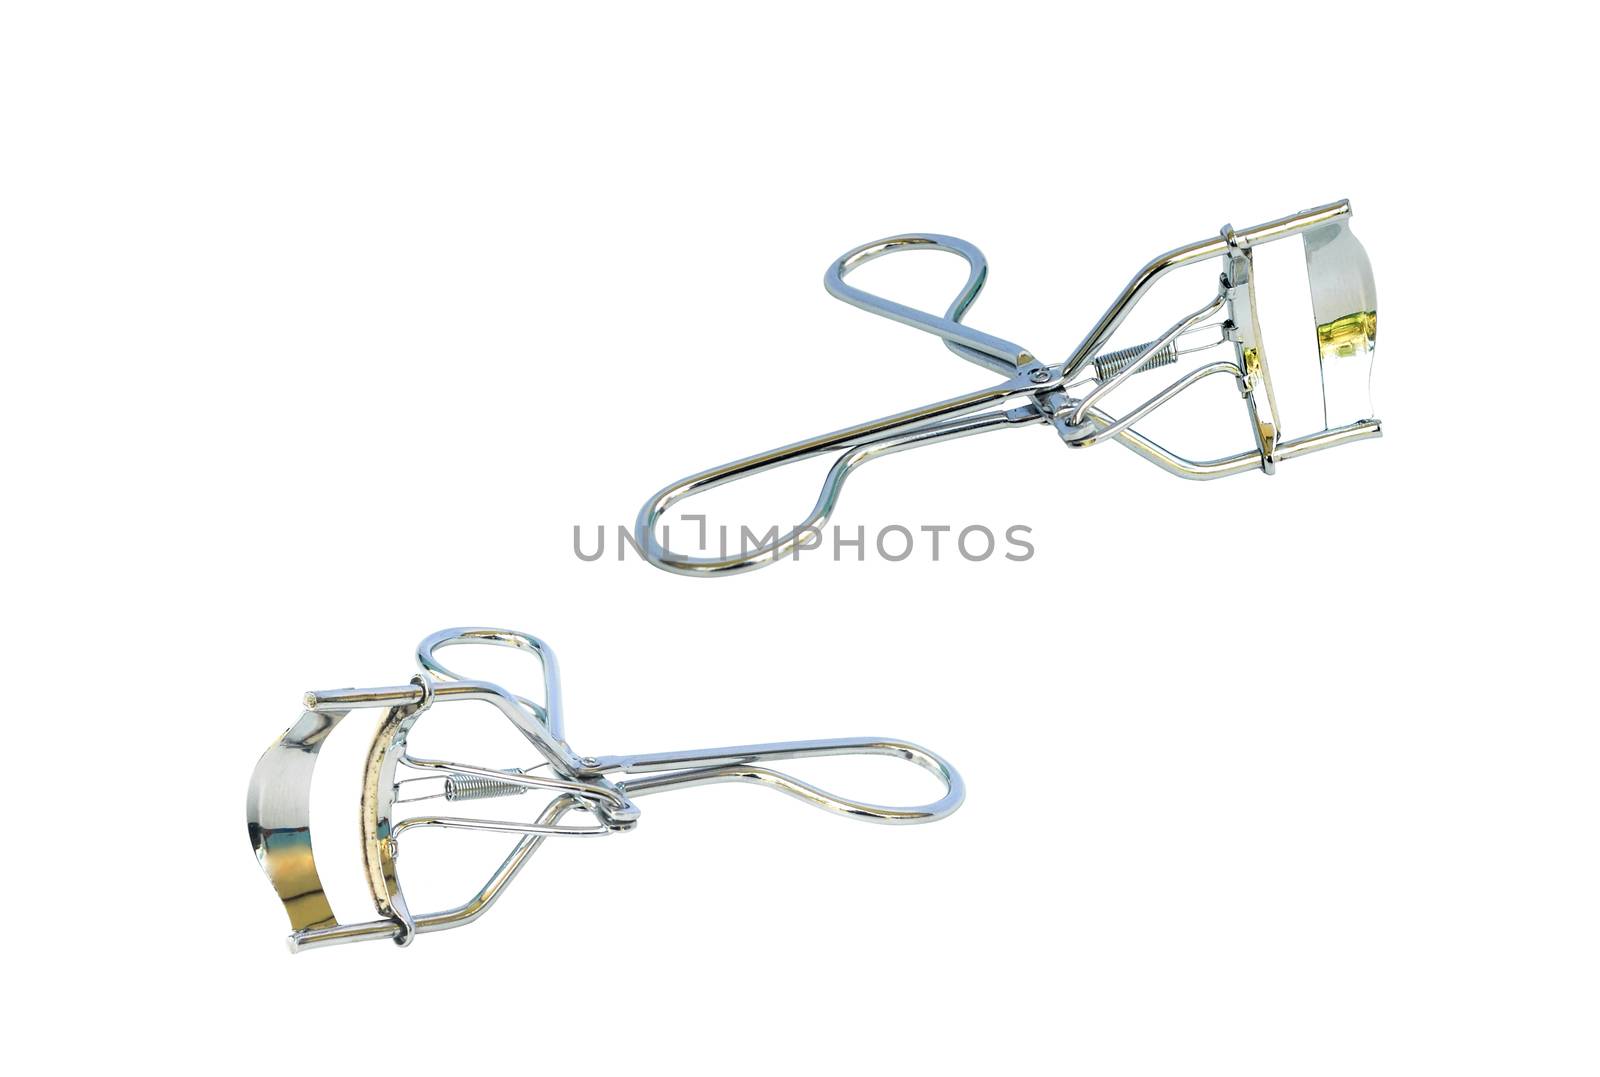 Eyelash curler on white background.With Clipping Path.